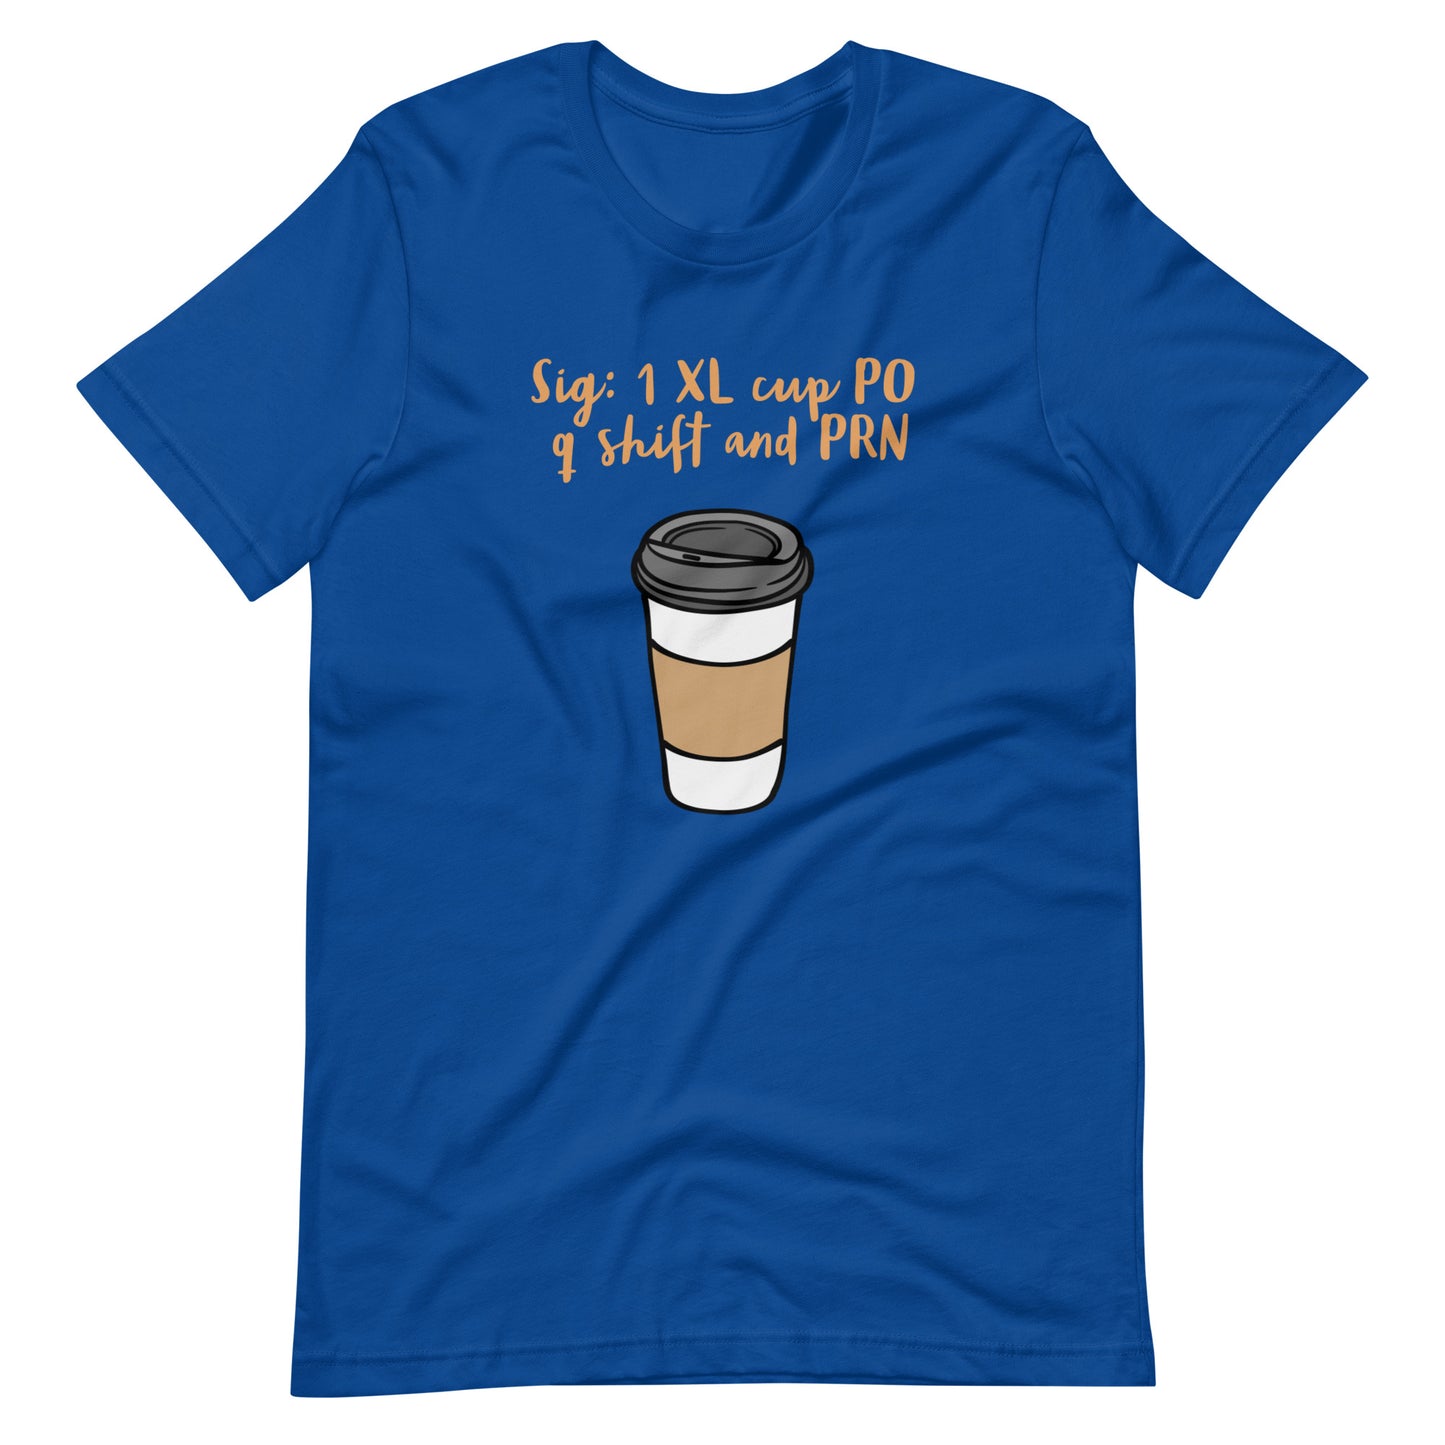 Graphic Tee, Coffee, Funny Doctor Shirt, Medical Student, Funny Nurse Shirt, Funny Resident Shirt, Doctor, Physician, Resident, Nurse, PA, NP, Medical Student